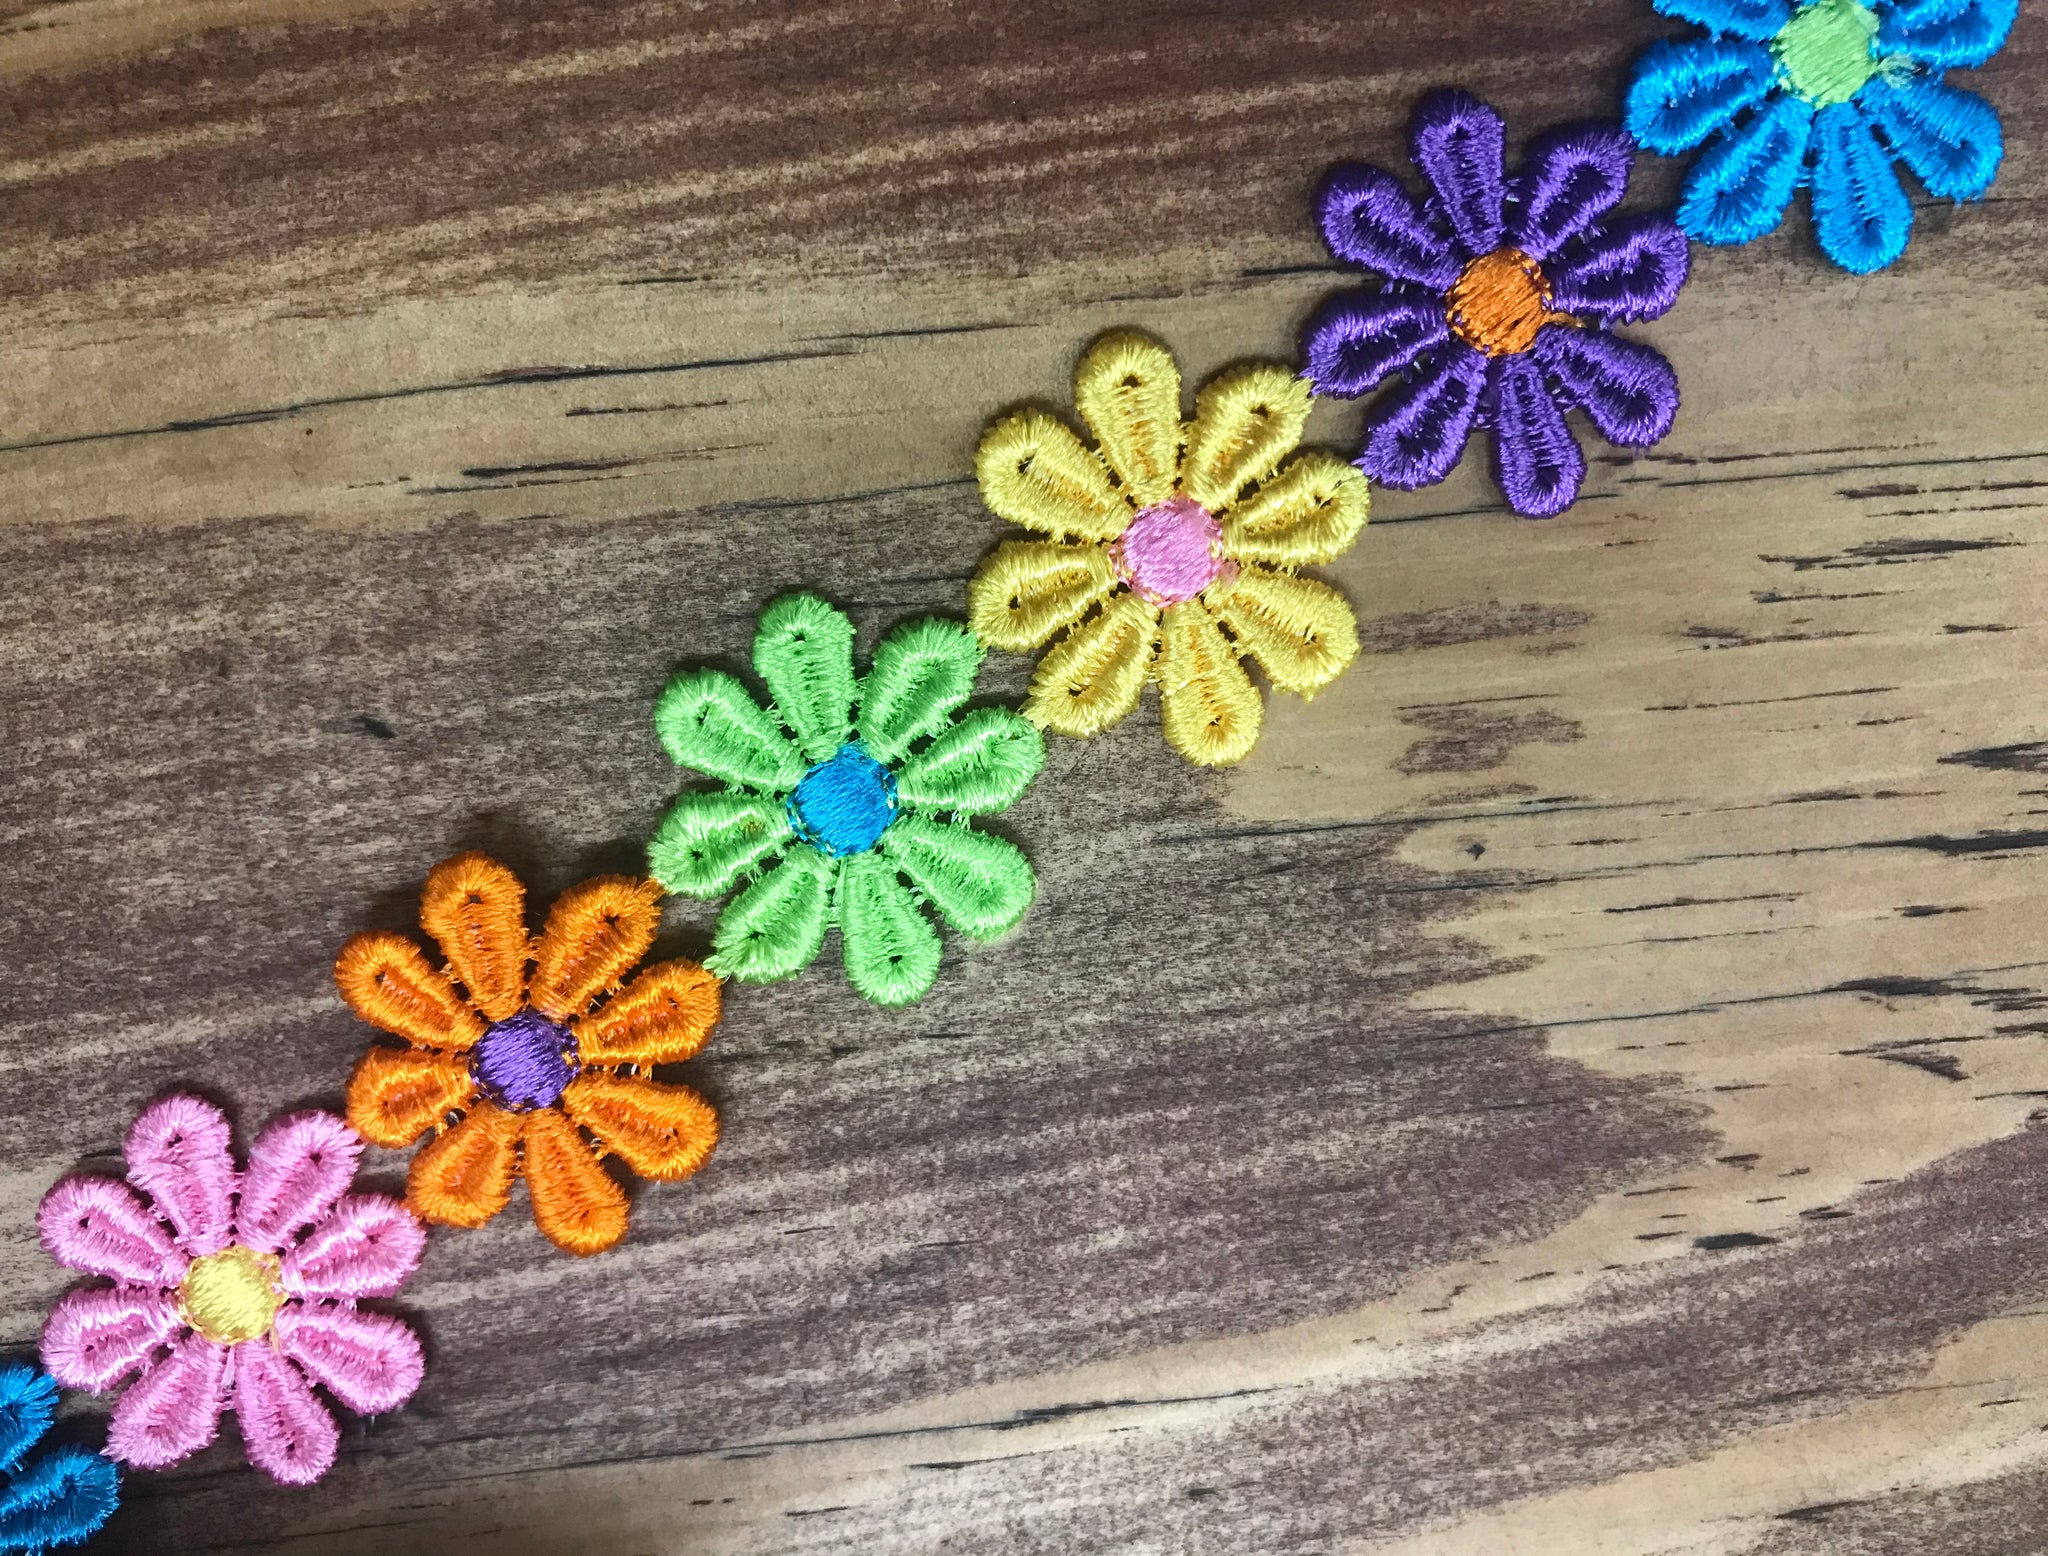 Multi Color Daisies and Butterflies Trims.